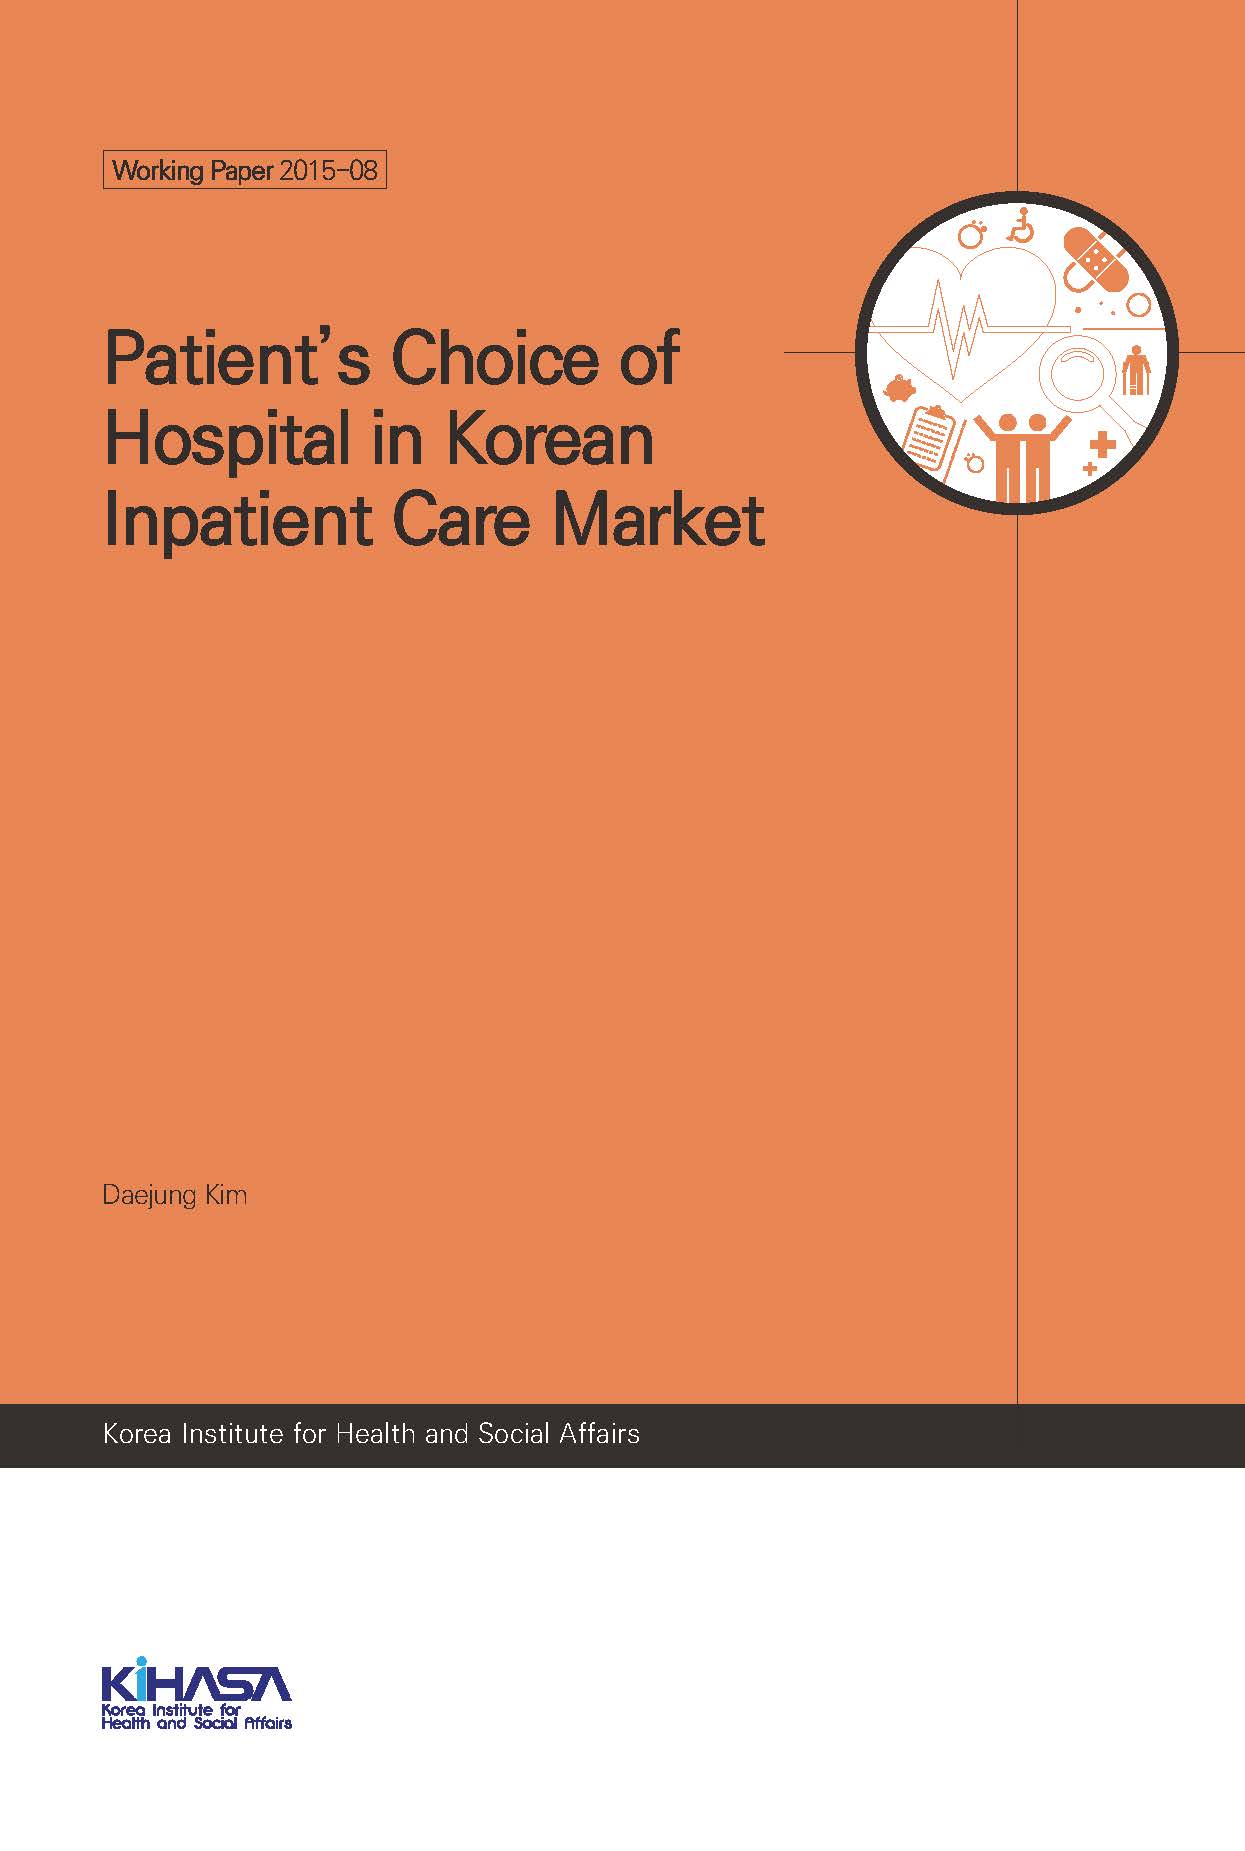 Patient’s Choice of Hospital in Korean Inpatient Care Market